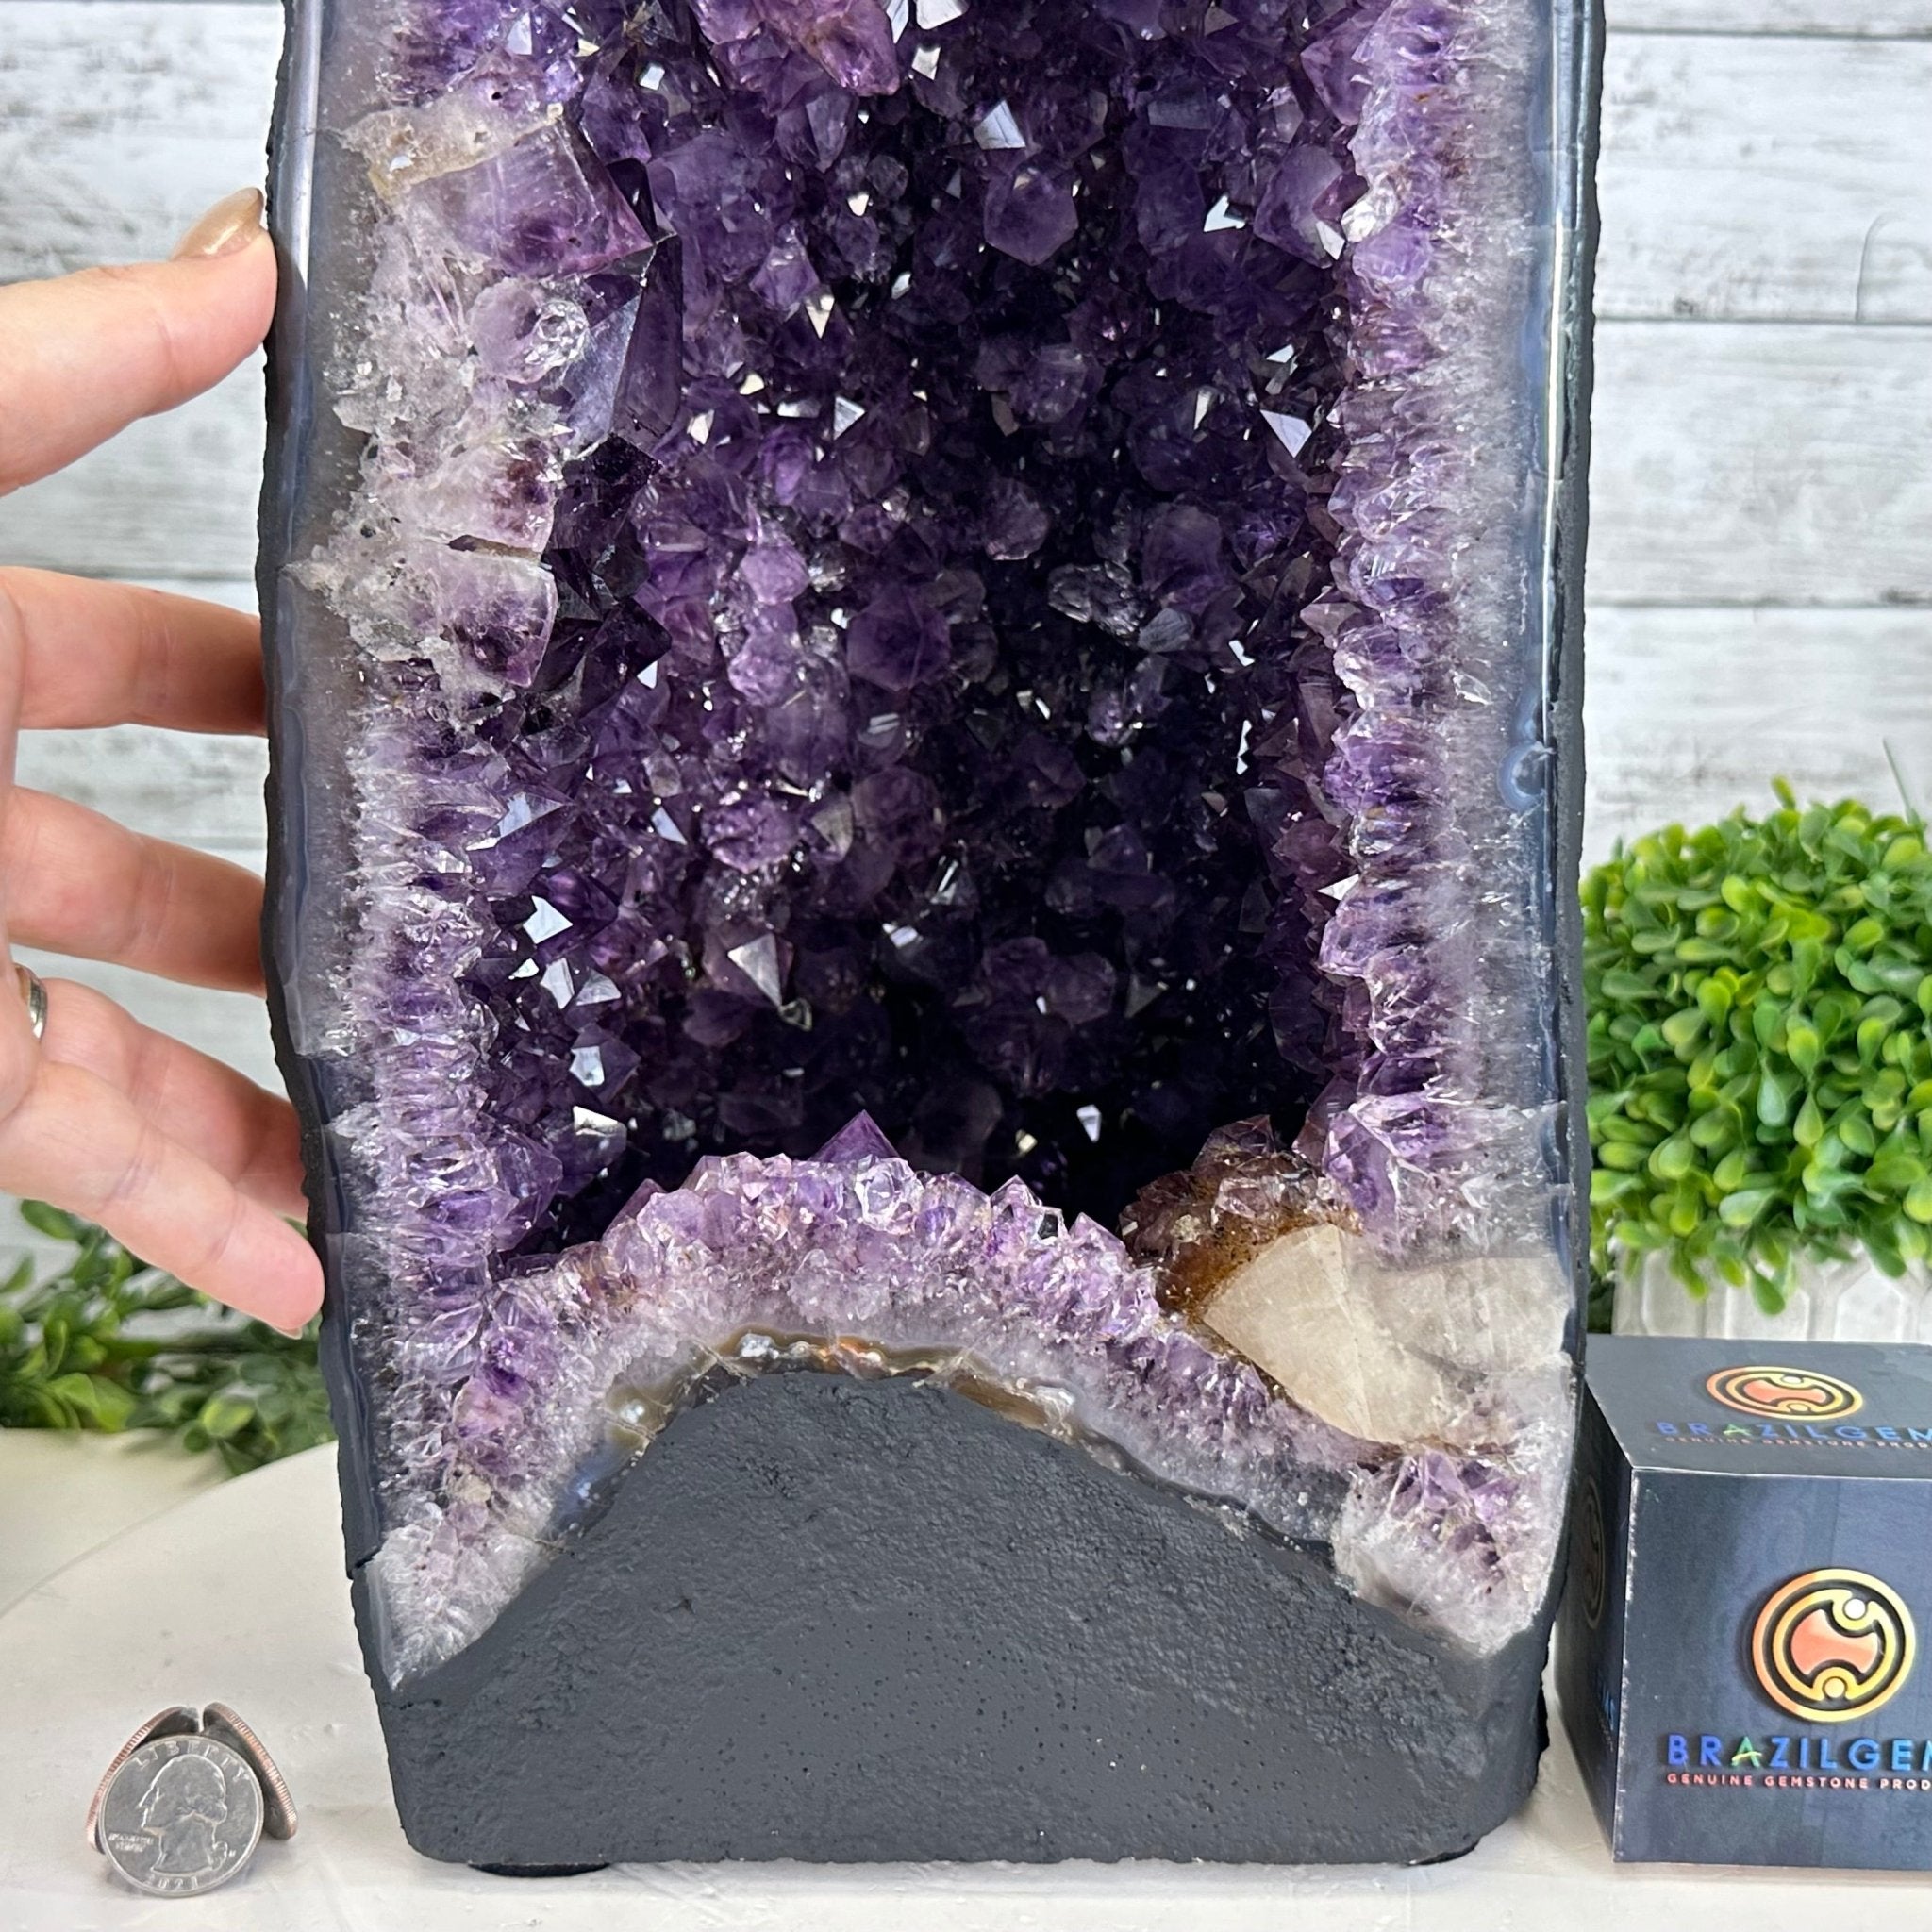 Quality Brazilian Amethyst Cathedral, 40.1 lbs & 19.8" Tall, #5601 - 1412 - Brazil GemsBrazil GemsQuality Brazilian Amethyst Cathedral, 40.1 lbs & 19.8" Tall, #5601 - 1412Cathedrals5601 - 1412